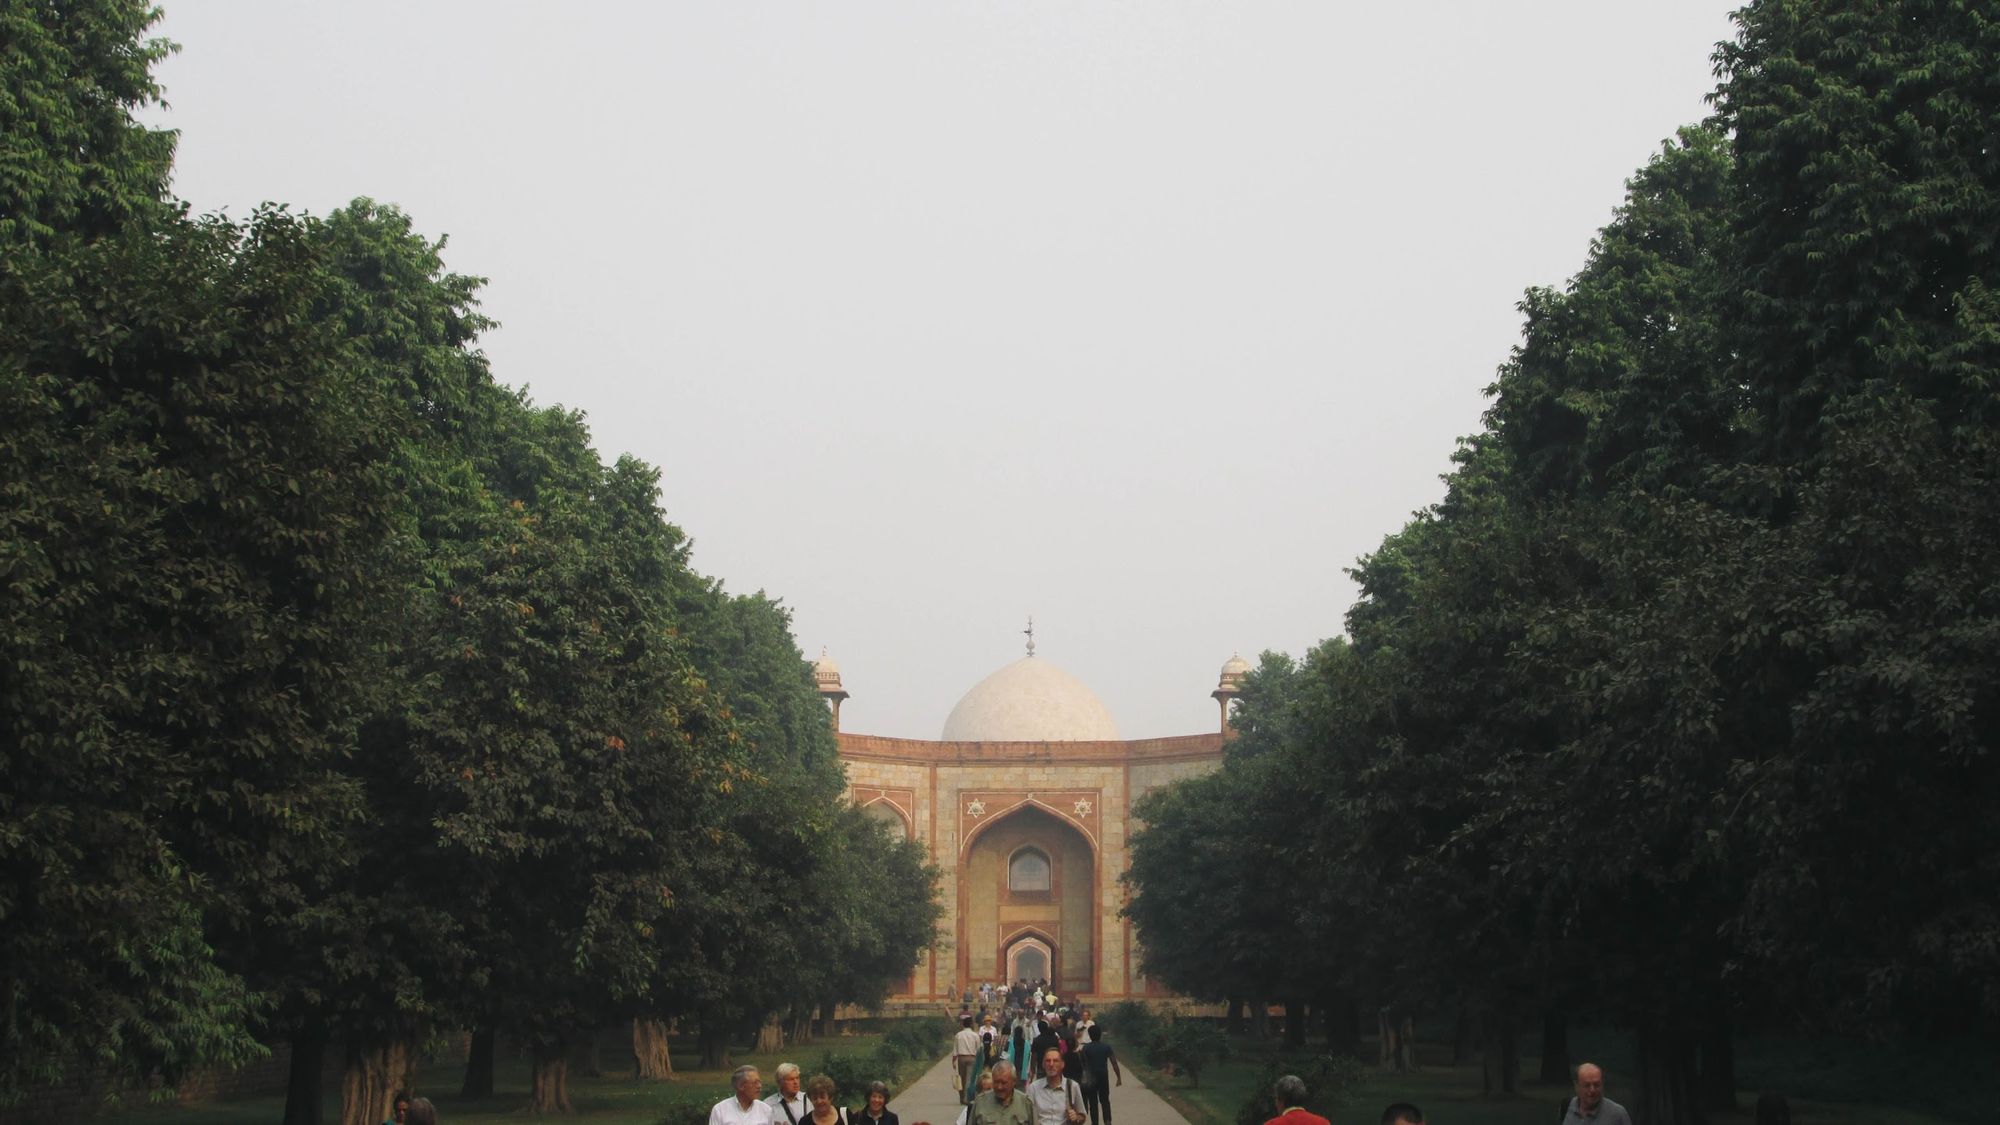 The entrance to the Humayun's Tomb